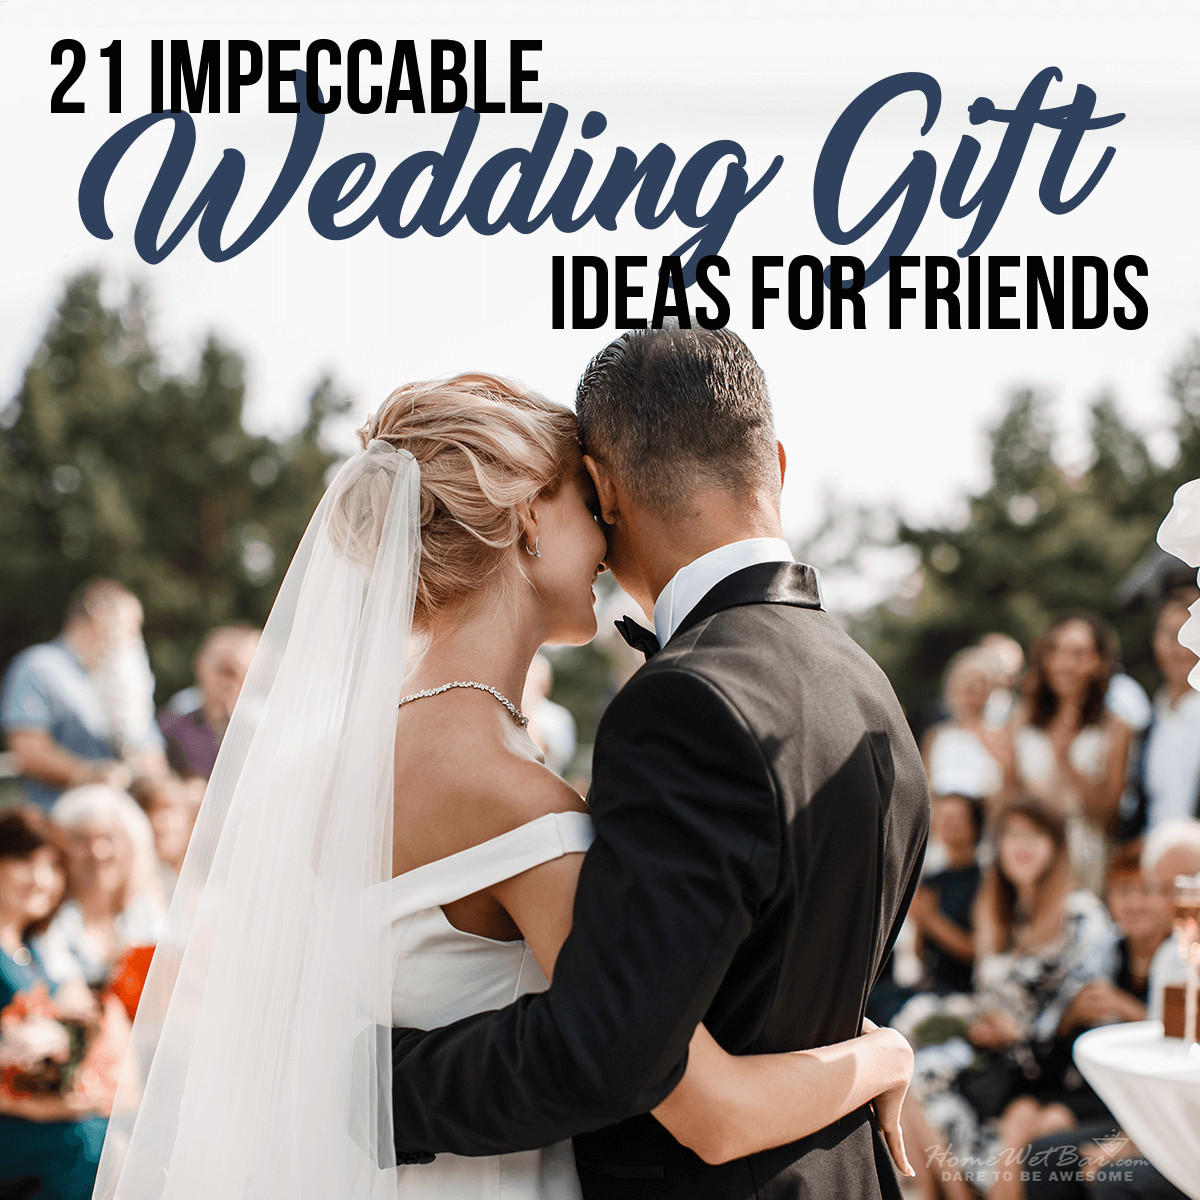 Wedding Gift Ideas For Young Couples
 21 Impeccable Wedding Gift Ideas for Friends